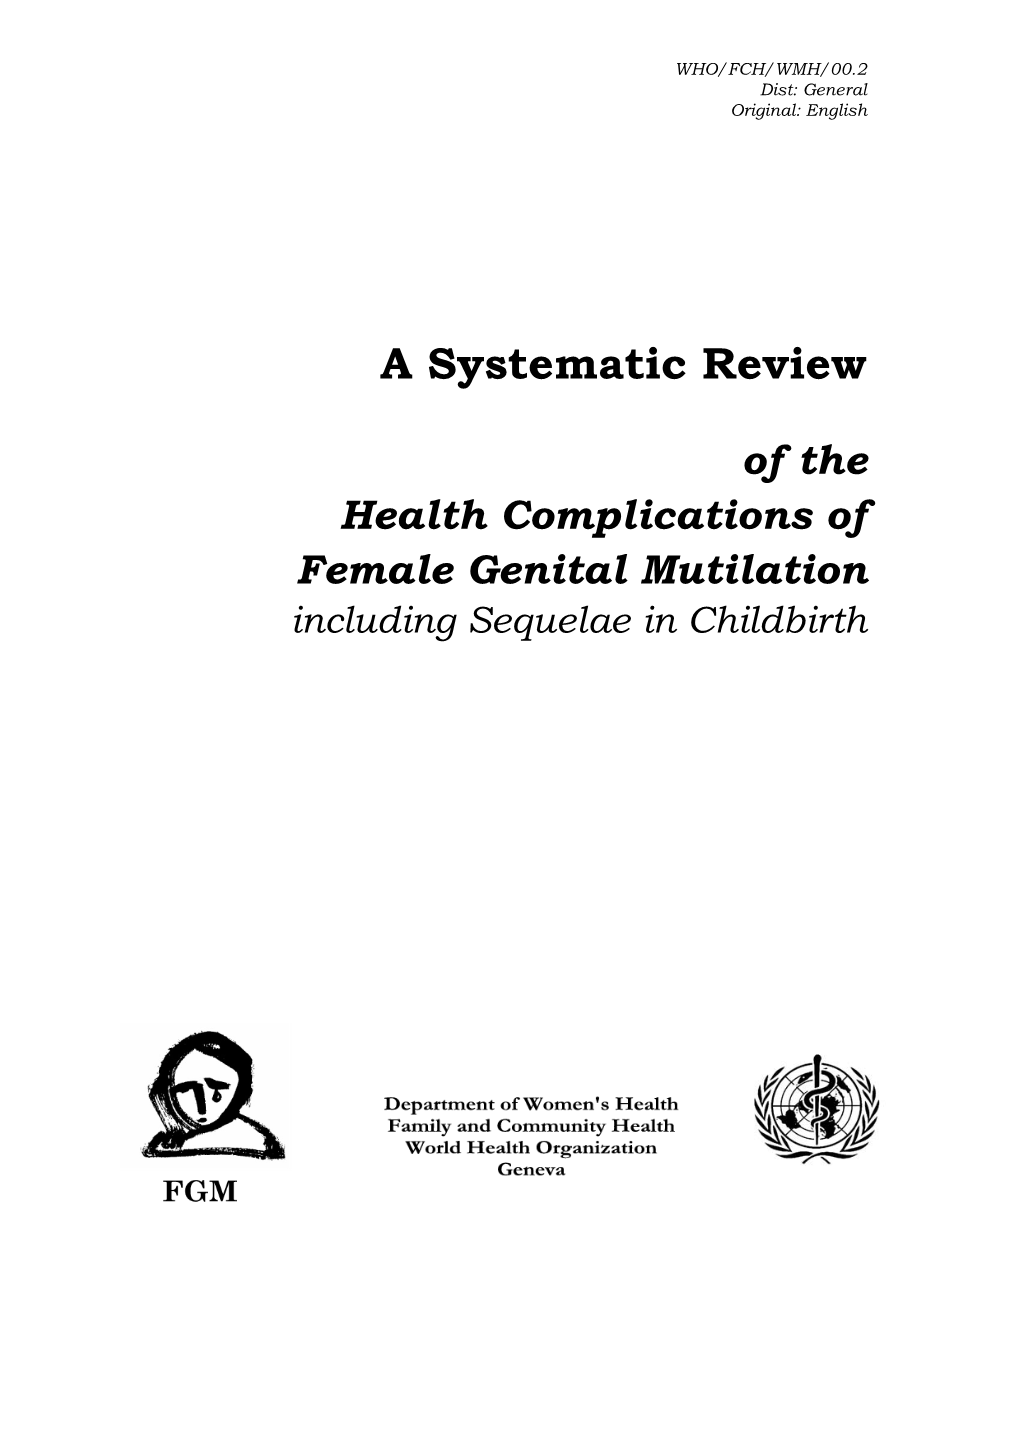 WHO. a Systematic Review of the Health Complications of Female Genital Mutilation Including Sequelae in Childbirth